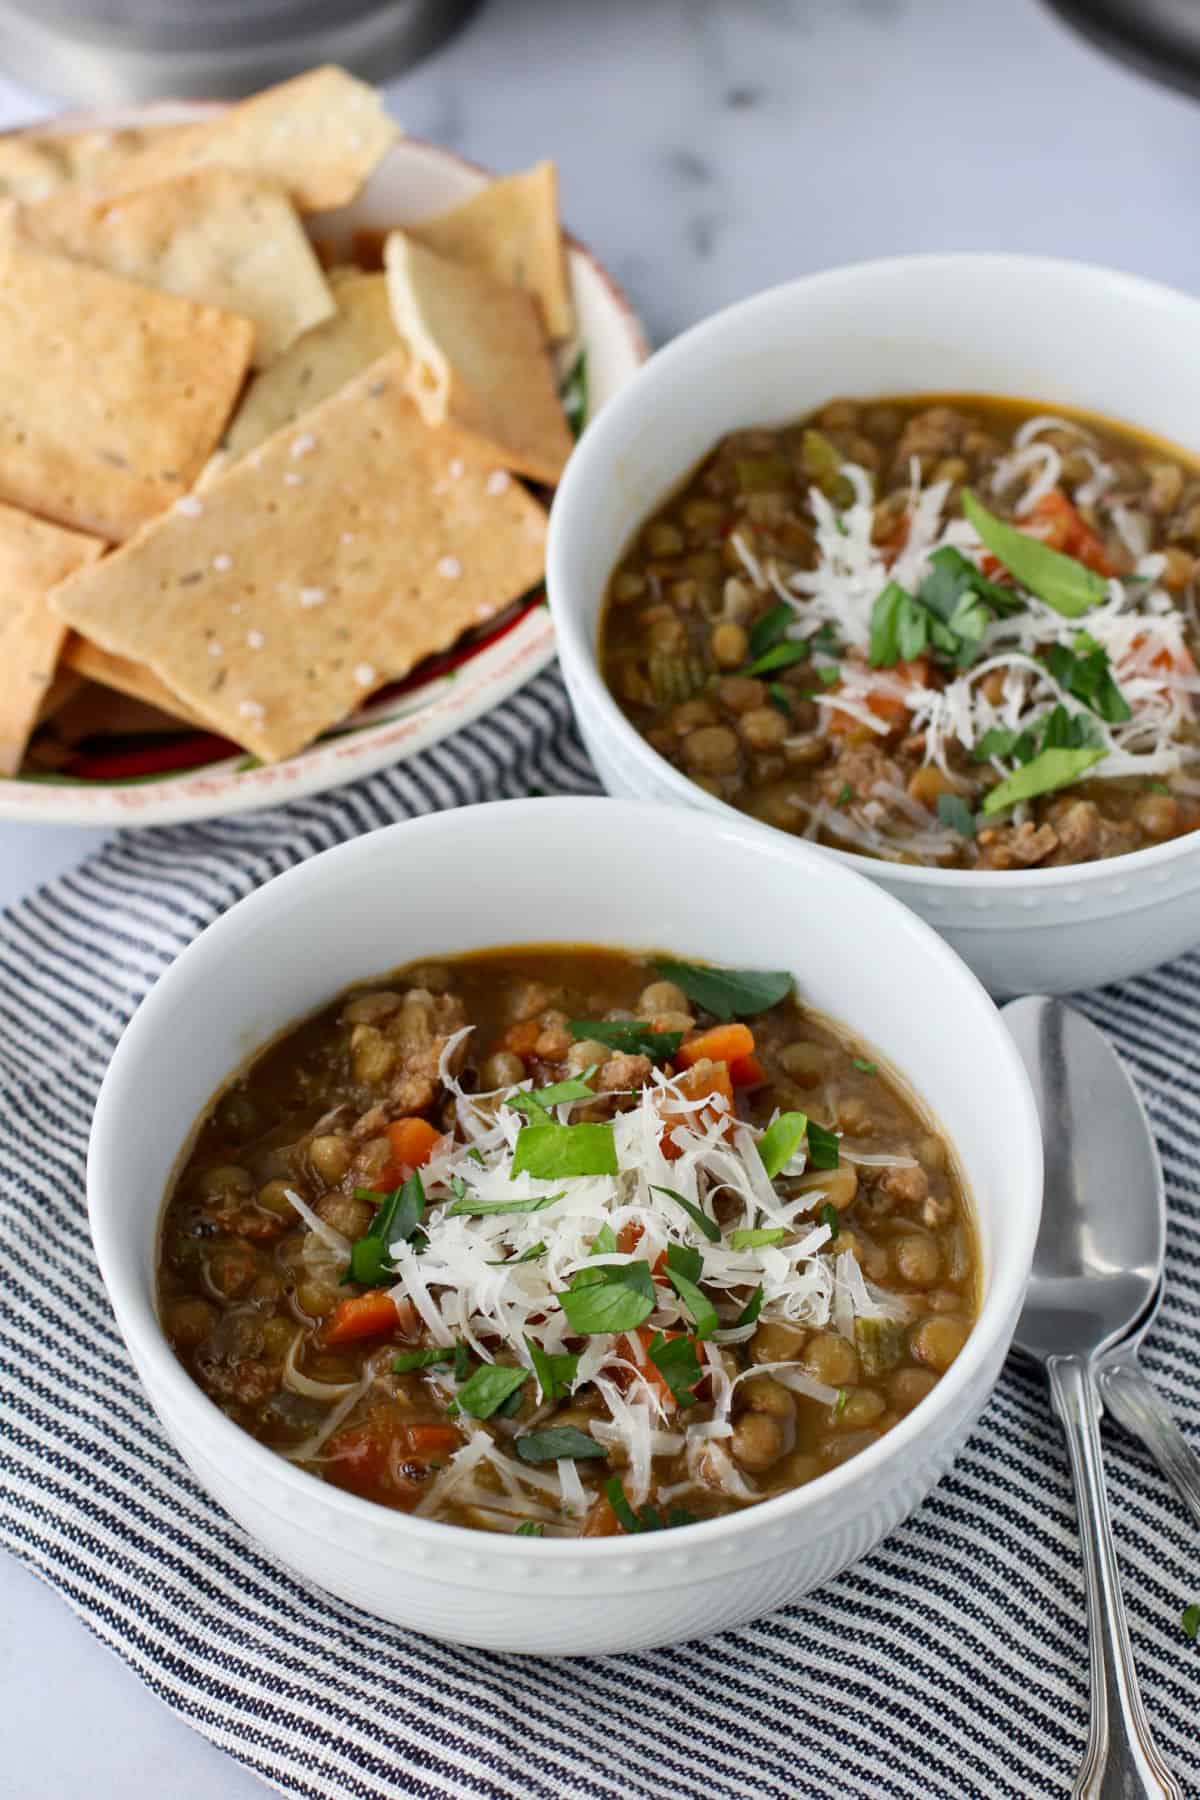 Spicy Turkey Sausage and Lentil Soup in bowls.